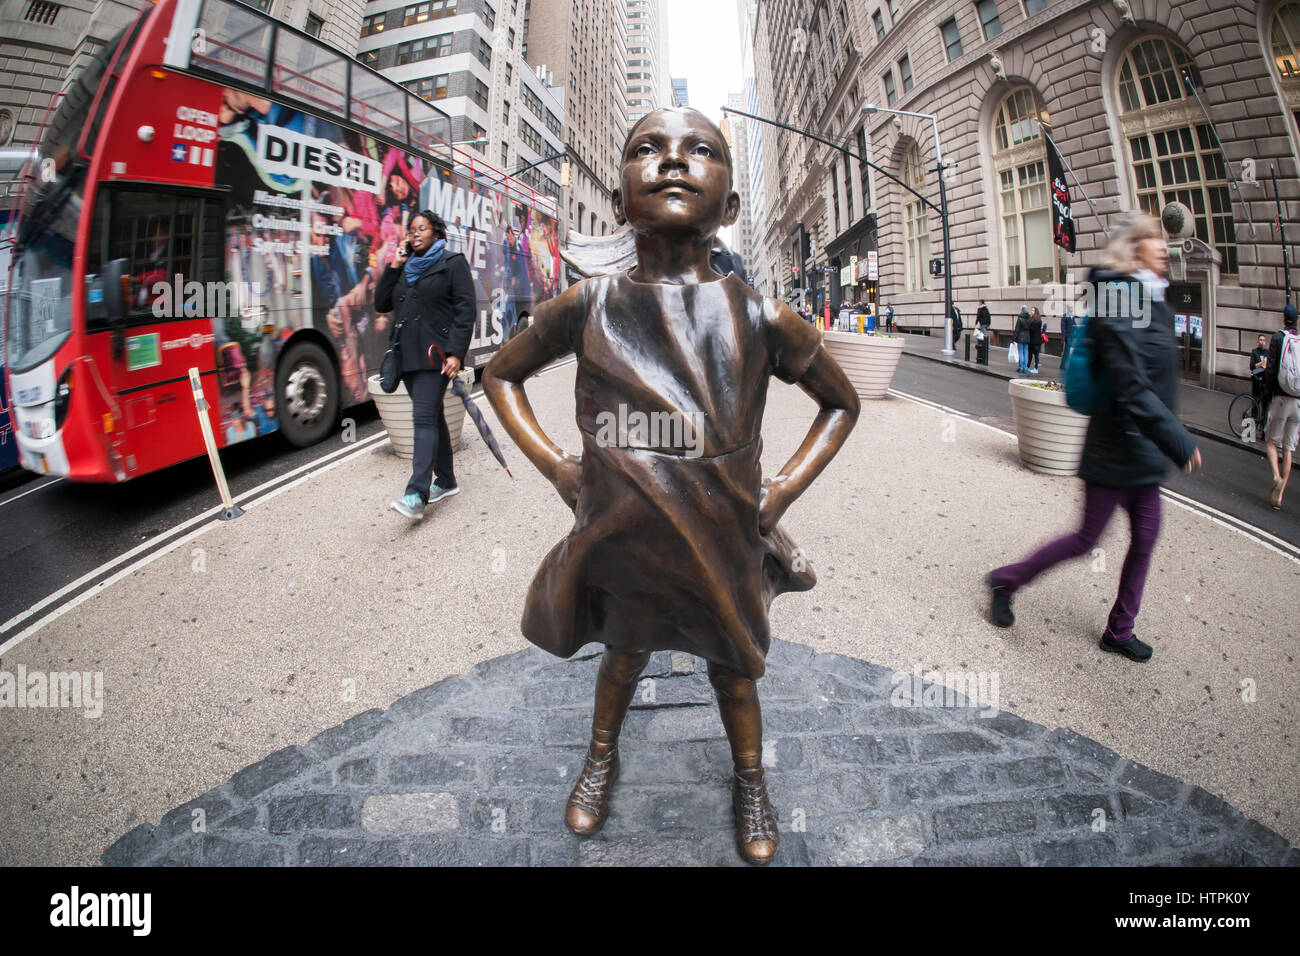 The bronze statue, 'The Fearless Girl' by the artist Kristen Visbal attracted attention at Bowling Green Park in New York on its first day, Tuesday, March 7, 2017. Installed just prior to International Women's Day, it is a campaign by State Street Global Advisors (SSGA) to educate the companies that have women in executive positions perform better and to call on the 3500 companies that collectively have more than $30 trillion in market capitalization to increase the amount of women on their boards. SSGA has the SPDR®SSGA Gender Diversity Index ETF trading under the moniker 'SHE'. (© Richard B. Stock Photo